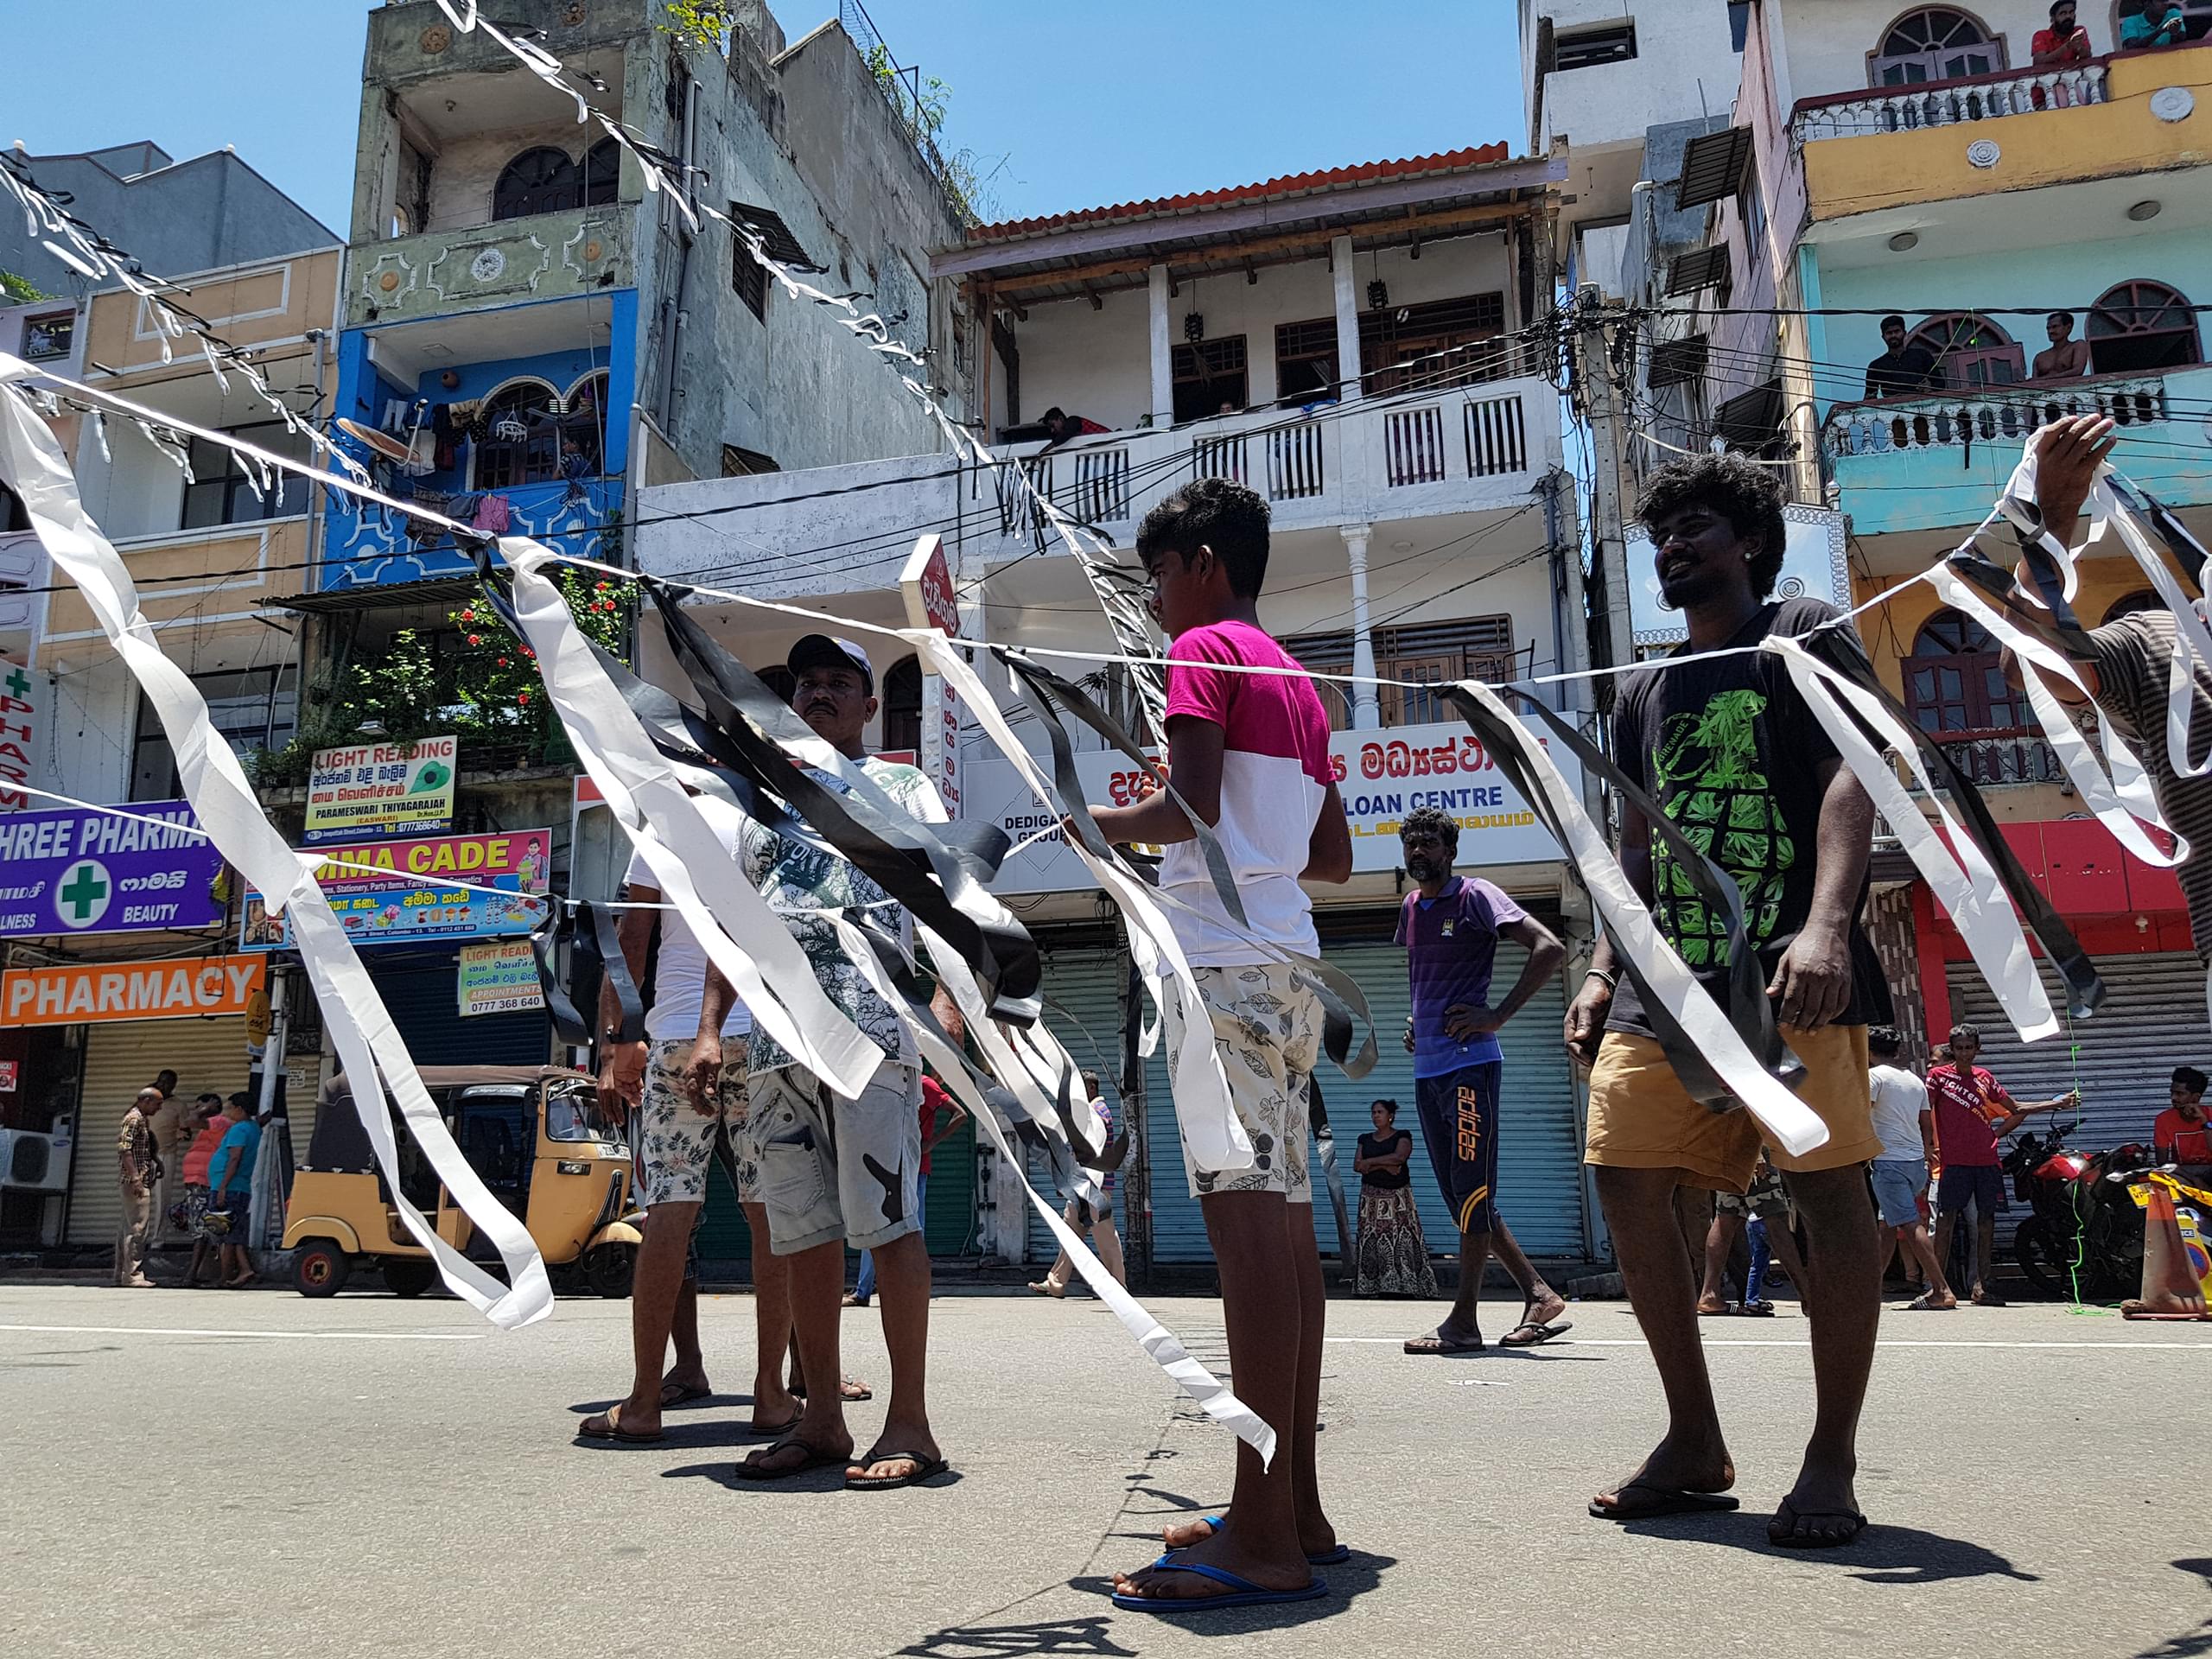 Mourners hang white flags in Sri Lanka, following the 2019 bombings of churches around the country. Photo by Groundviews (CC BY-ND 3.0)